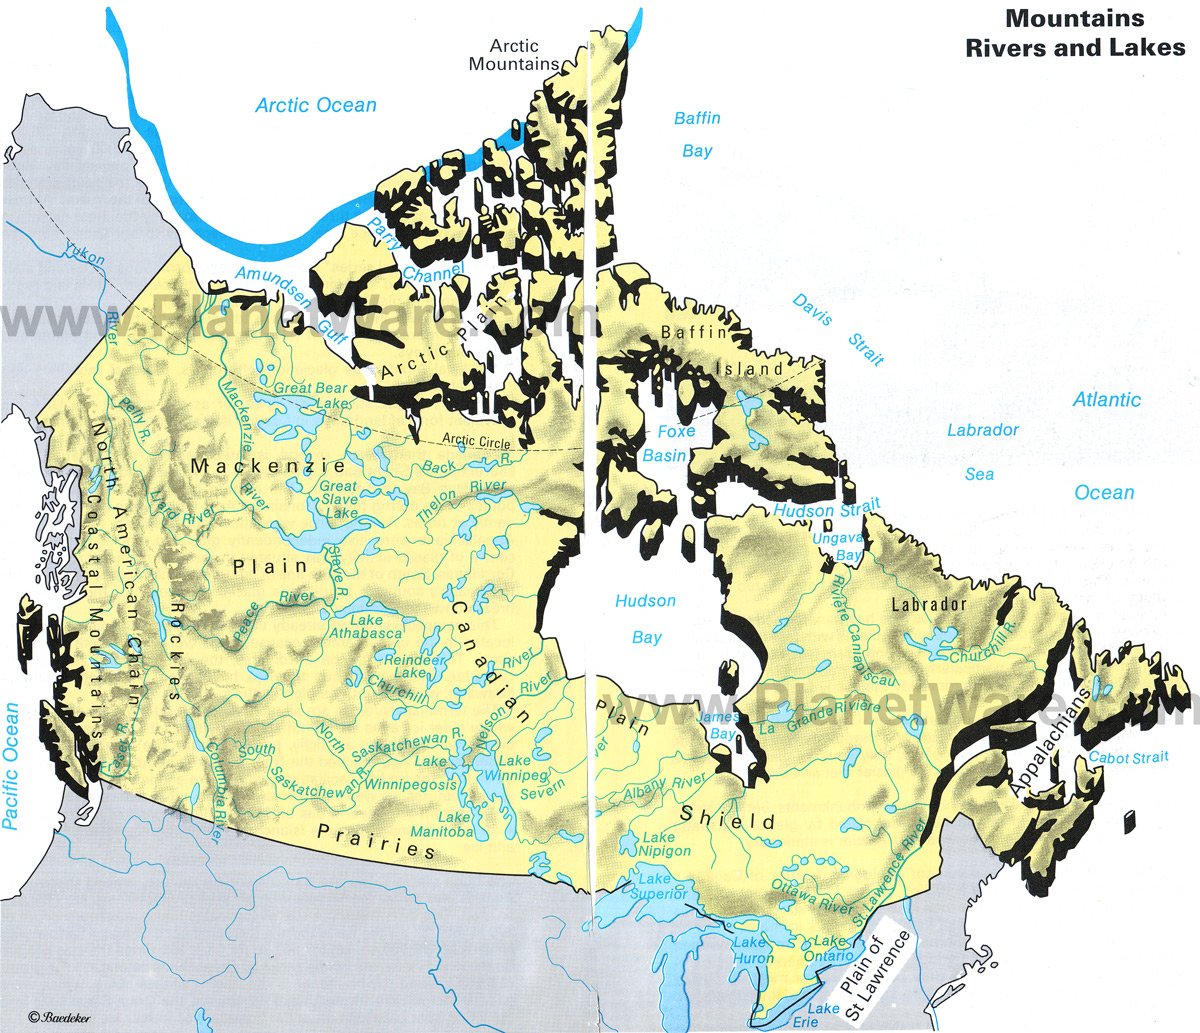 Canada Mountains Rivers and Lakes Map